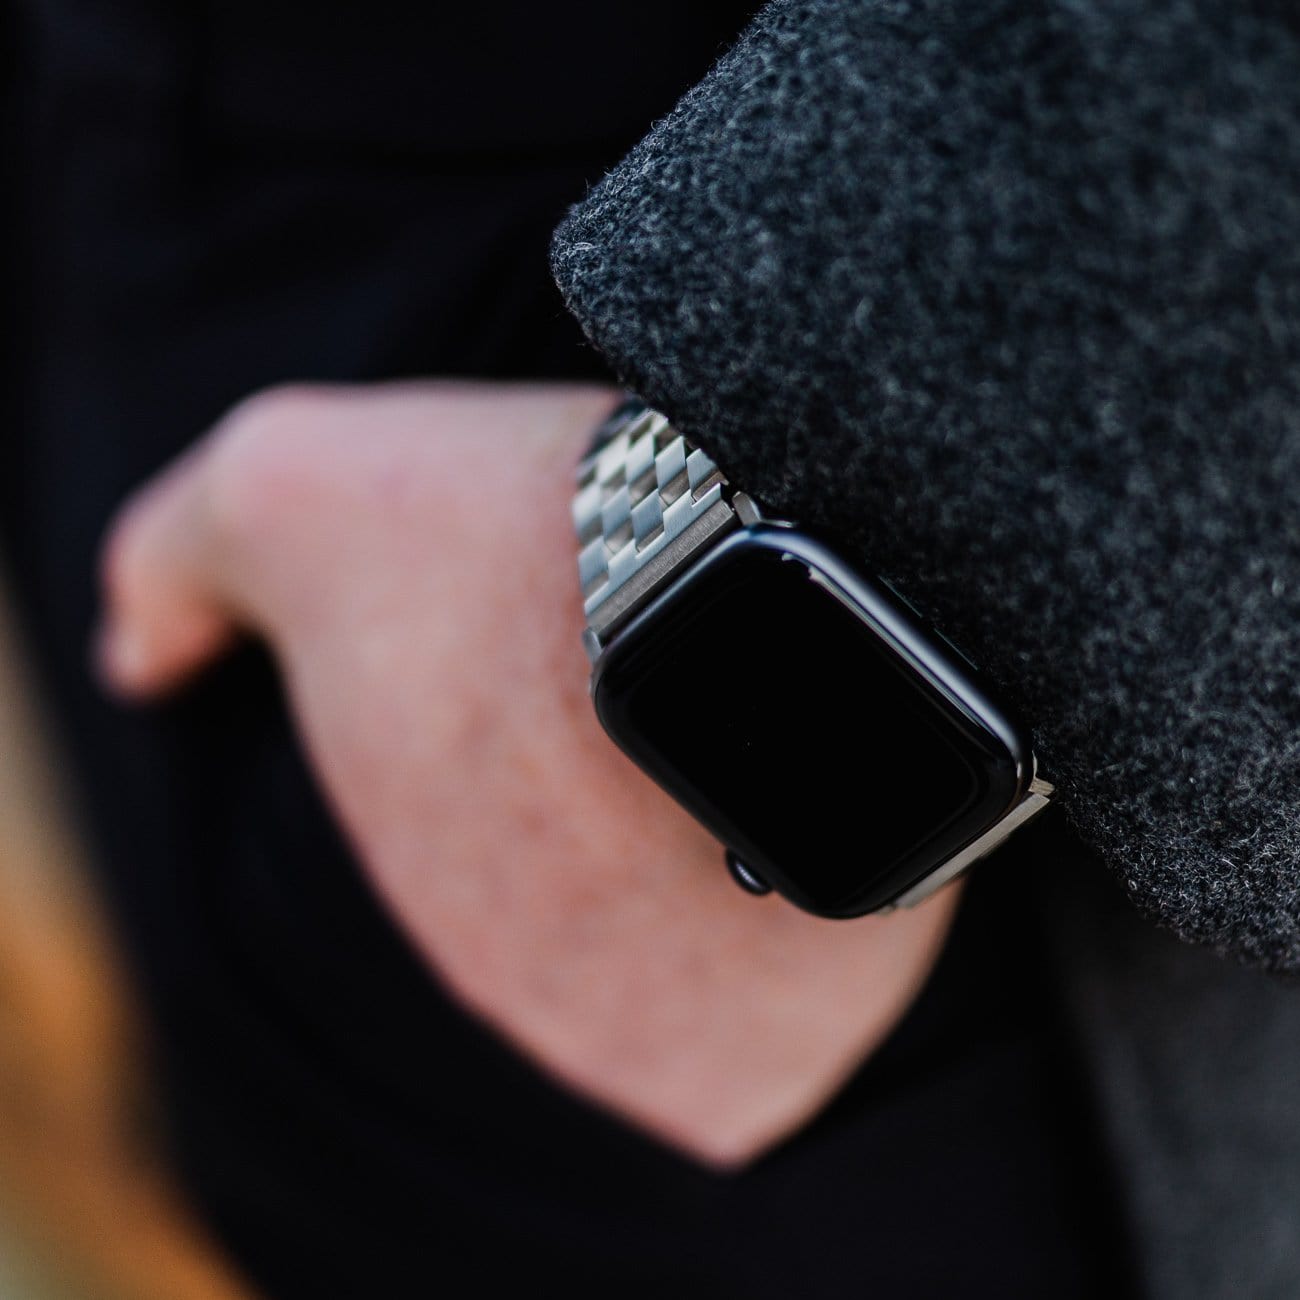 Black Metal Watch Band for Your Apple Watch | Bullstrap®